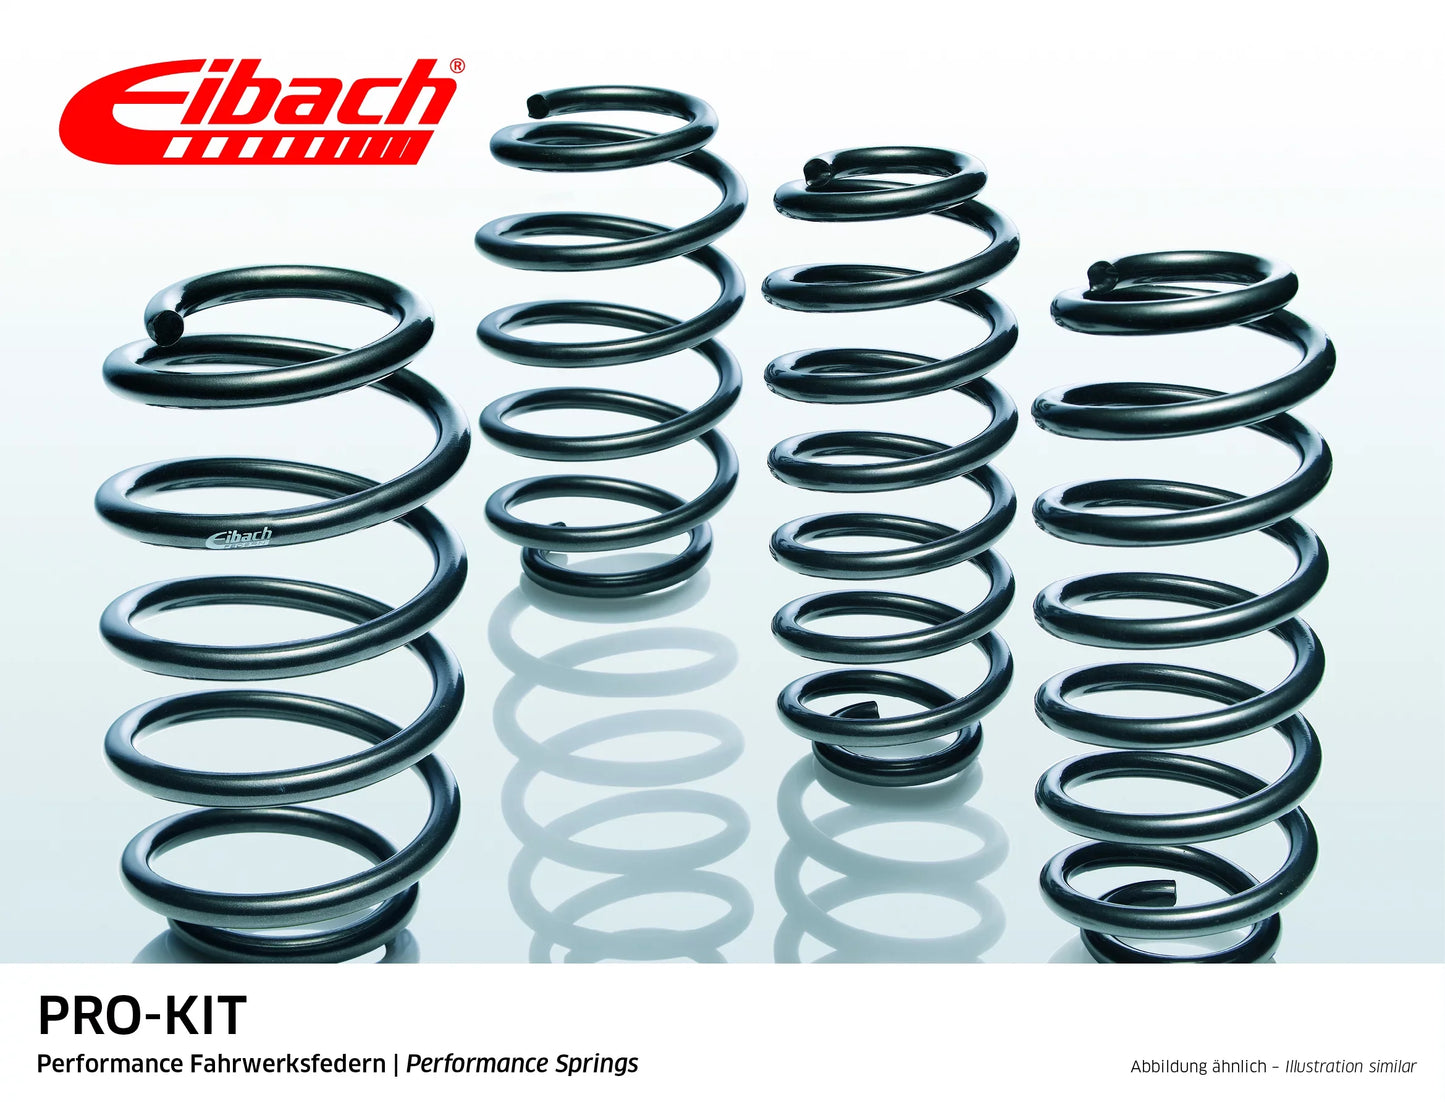 Eibach Pro-Kit Lowering Springs (E10-75-012-03-22) at £244.80